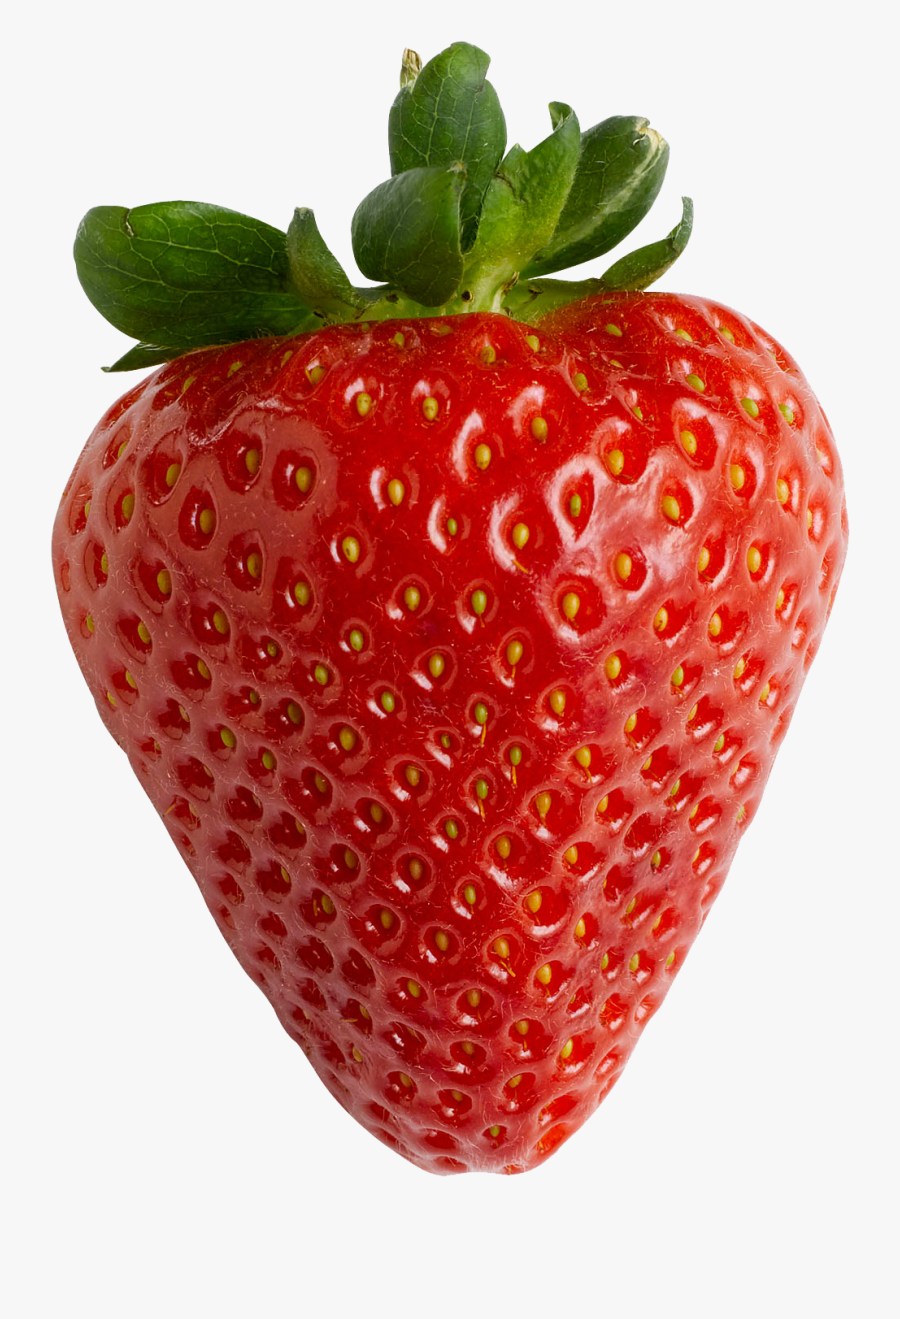 Download Strawberry Picture Png Image Pngimg - Strawberry Png, Transparent Clipart